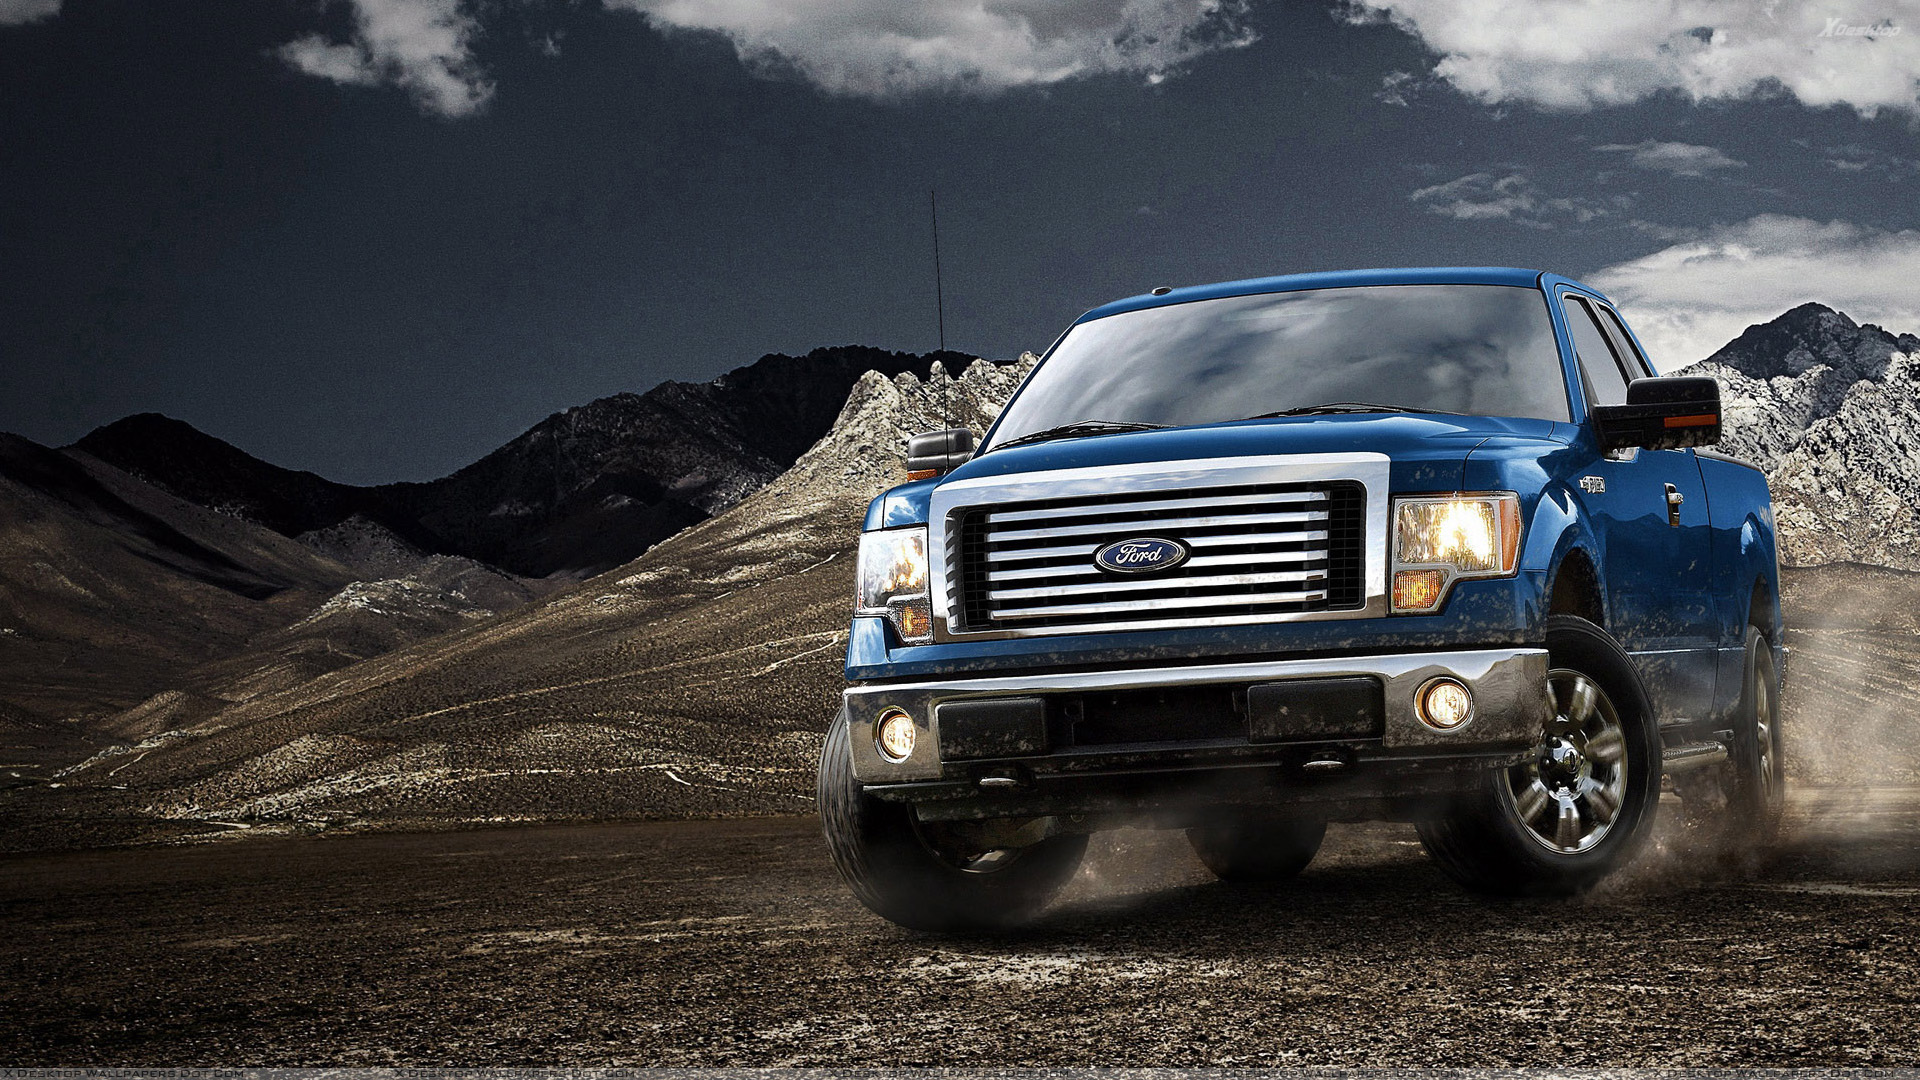 2012 Ford F 150 in Blue Near Mountains Wallpaper 1920x1080